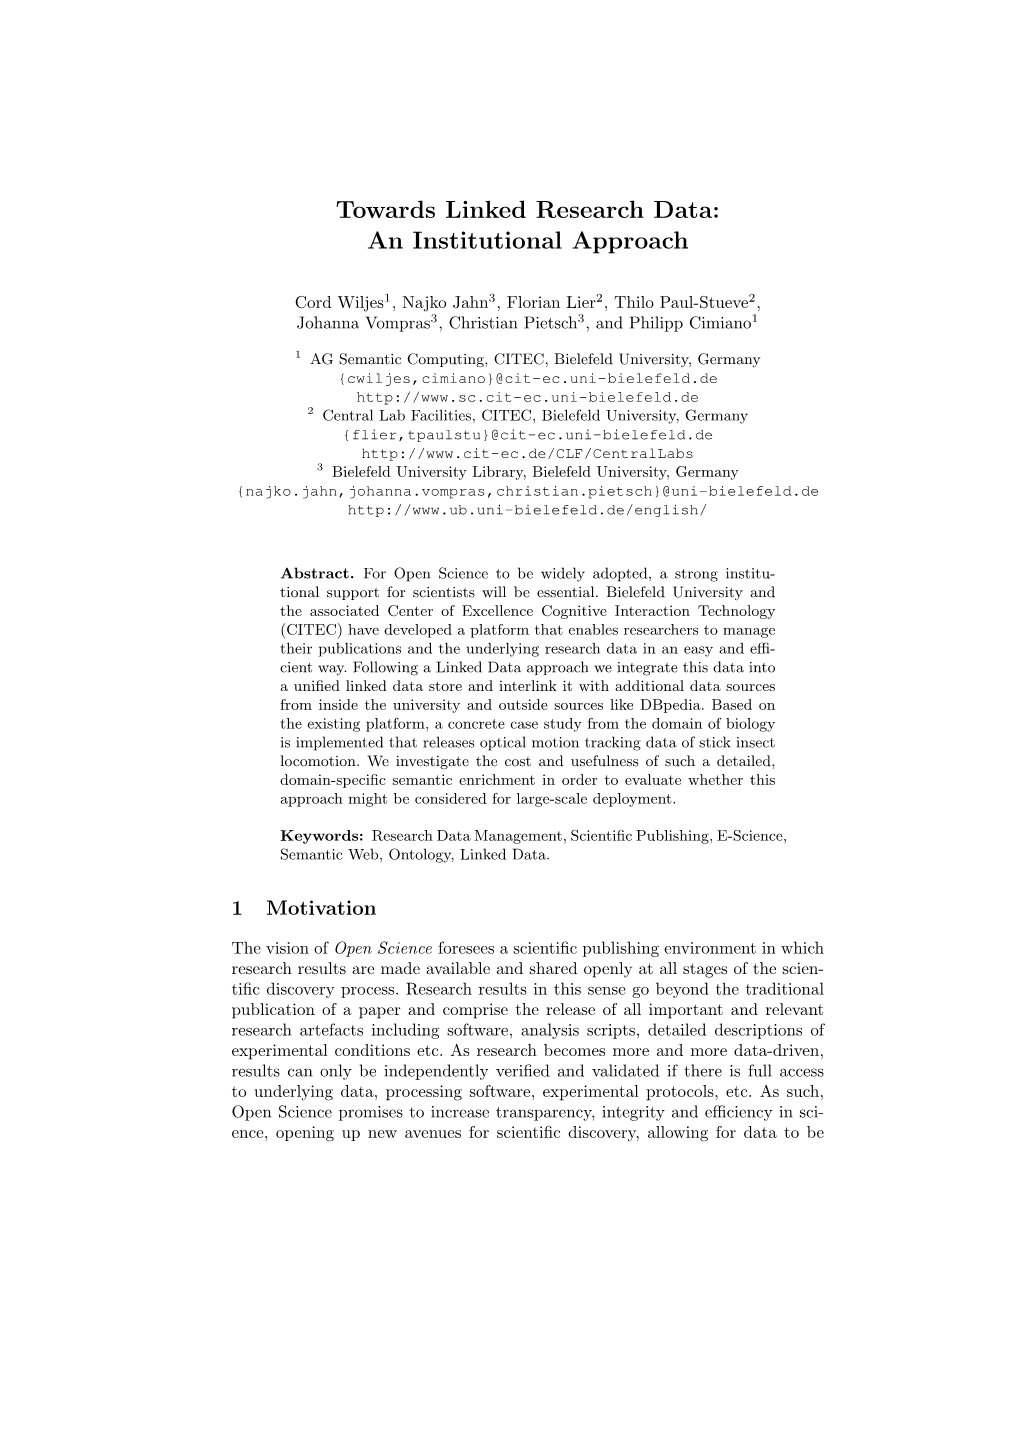 Towards Linked Research Data: an Institutional Approach